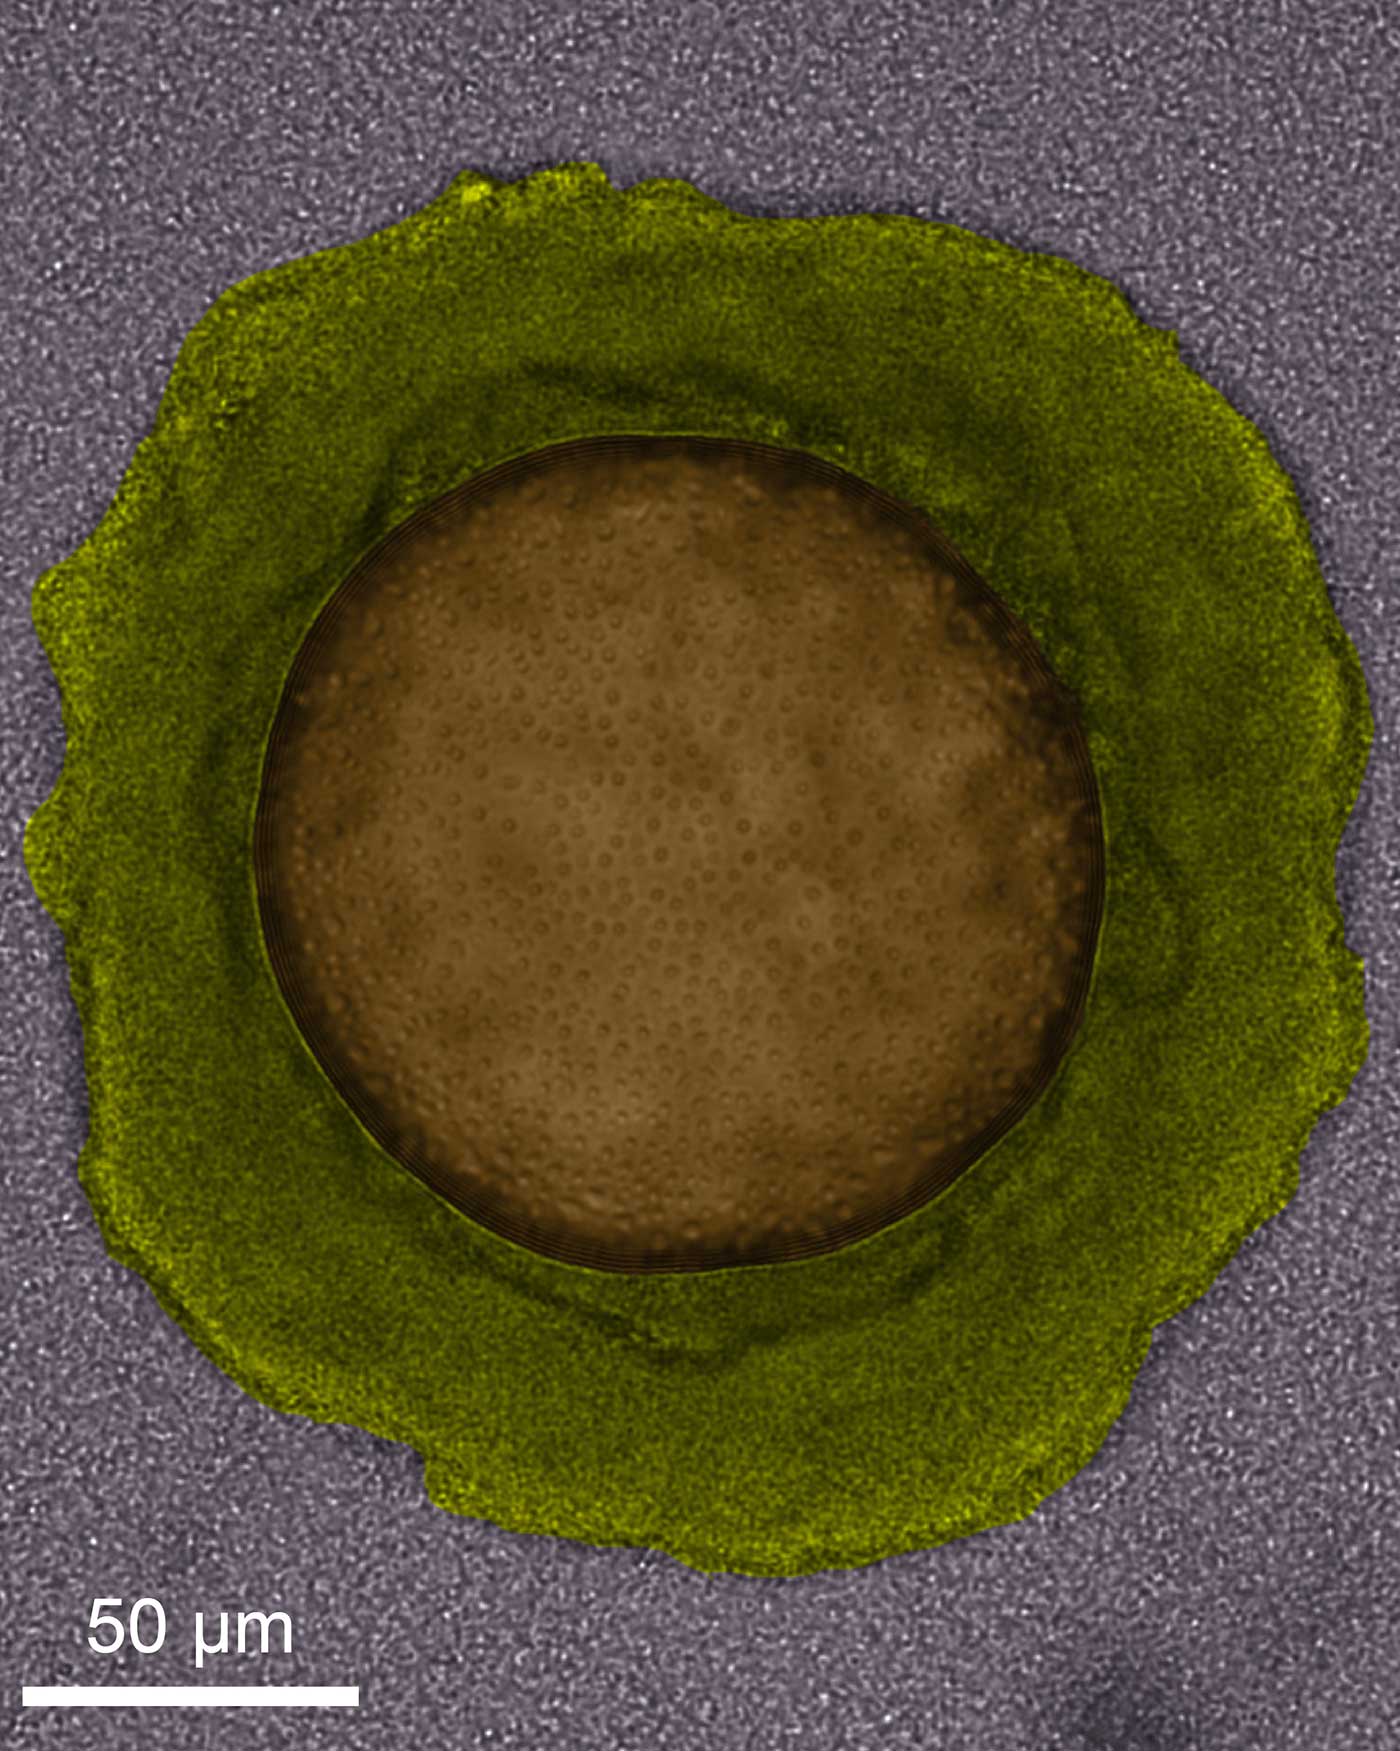 Oil-degrading bacteria (gray) finding an oil droplet (orange), forming biofilms around it (green), and eventually breaking it down into harmless compounds